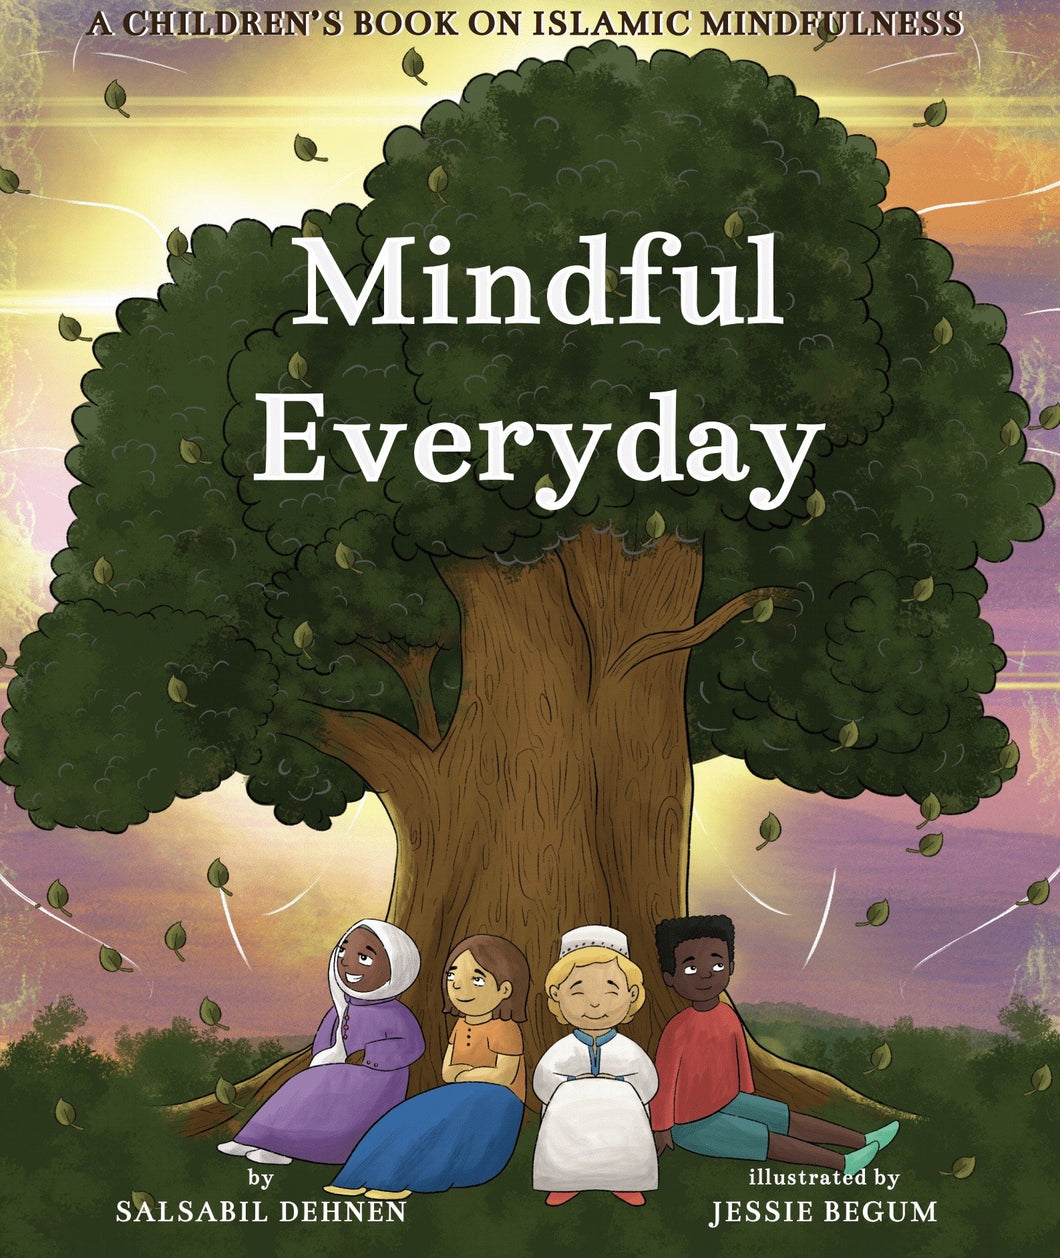 Mindful Everyday: A children’s book on Islamic Mindfulness